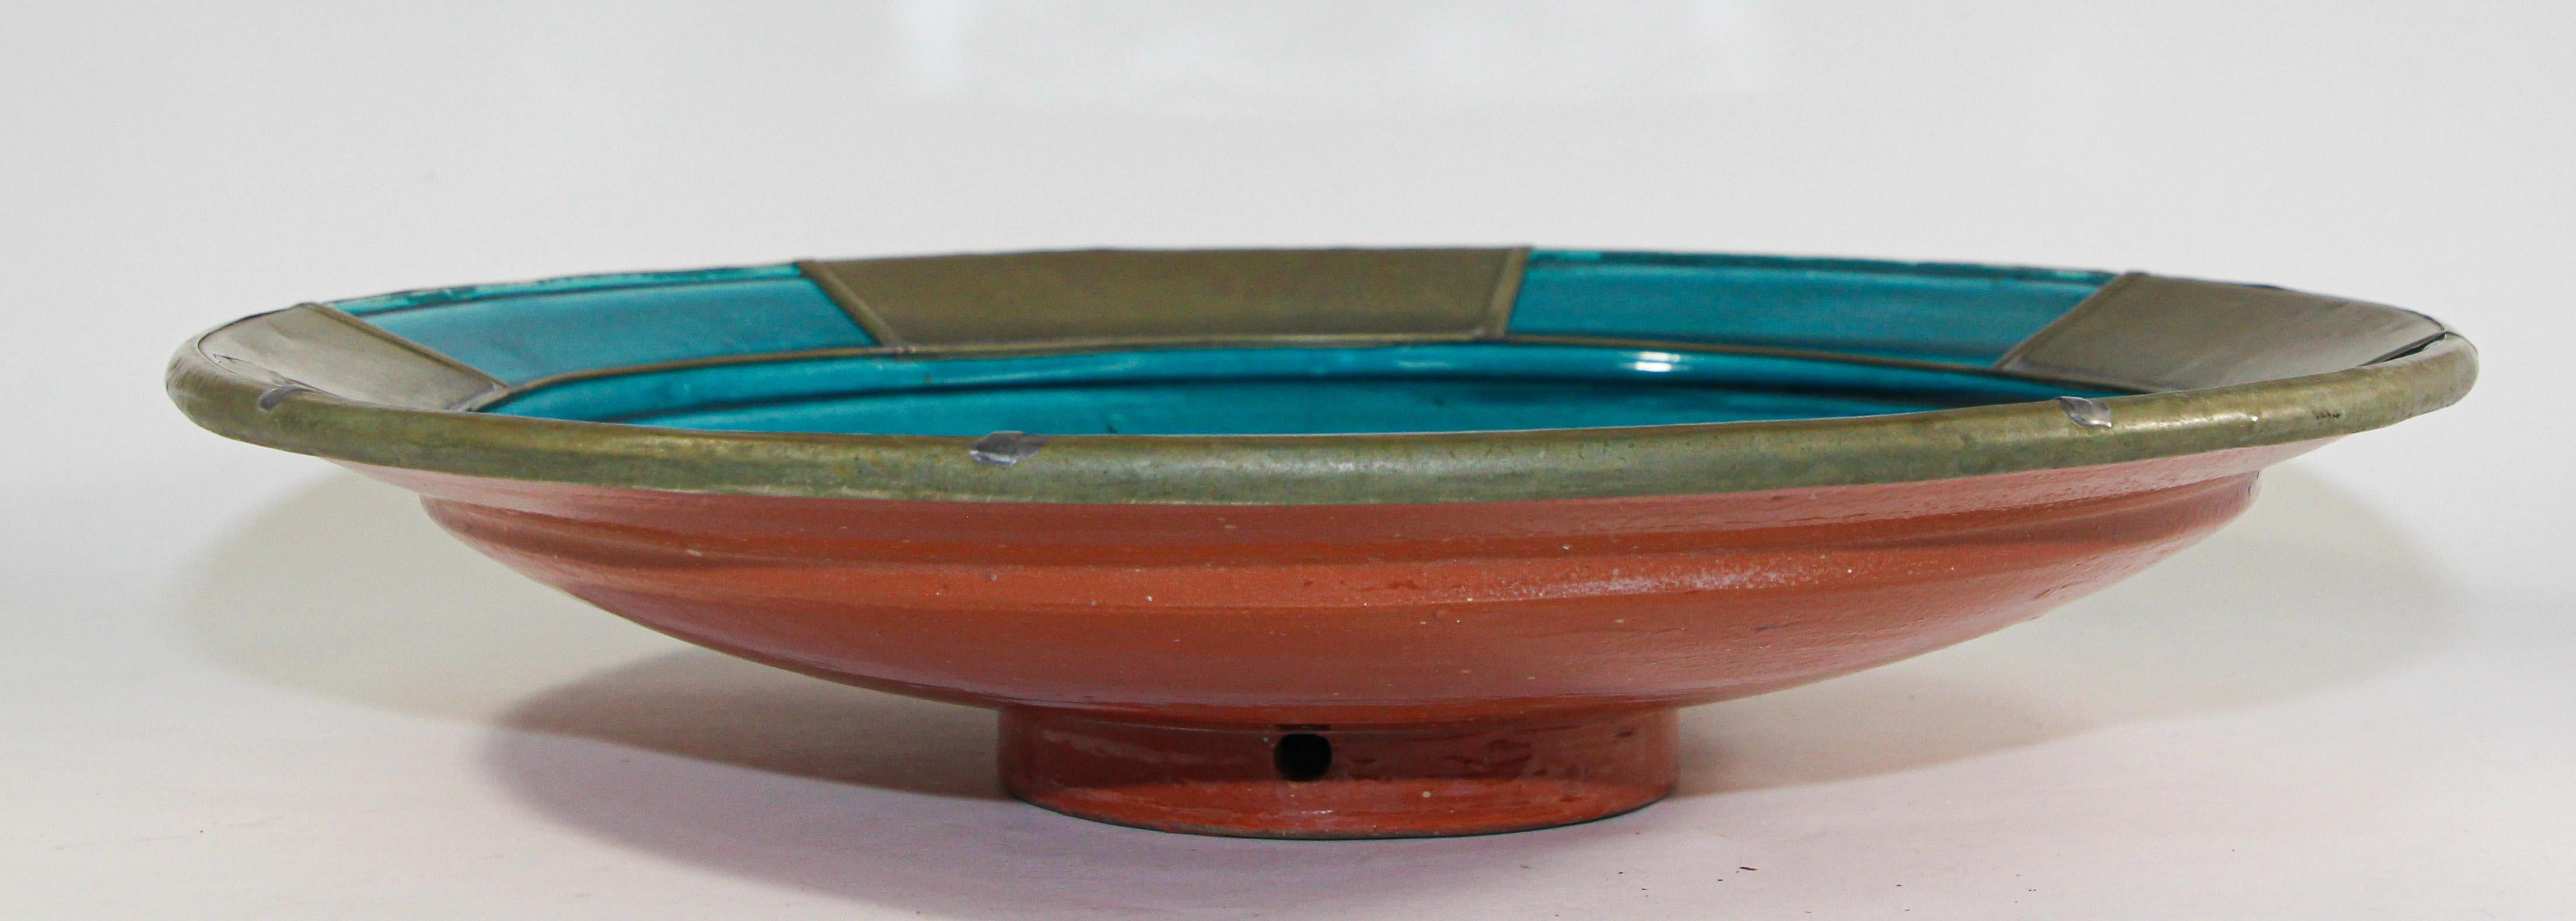 Hand-Crafted Moroccan Handcrafted Ceramic Turquoise Blue Bowl